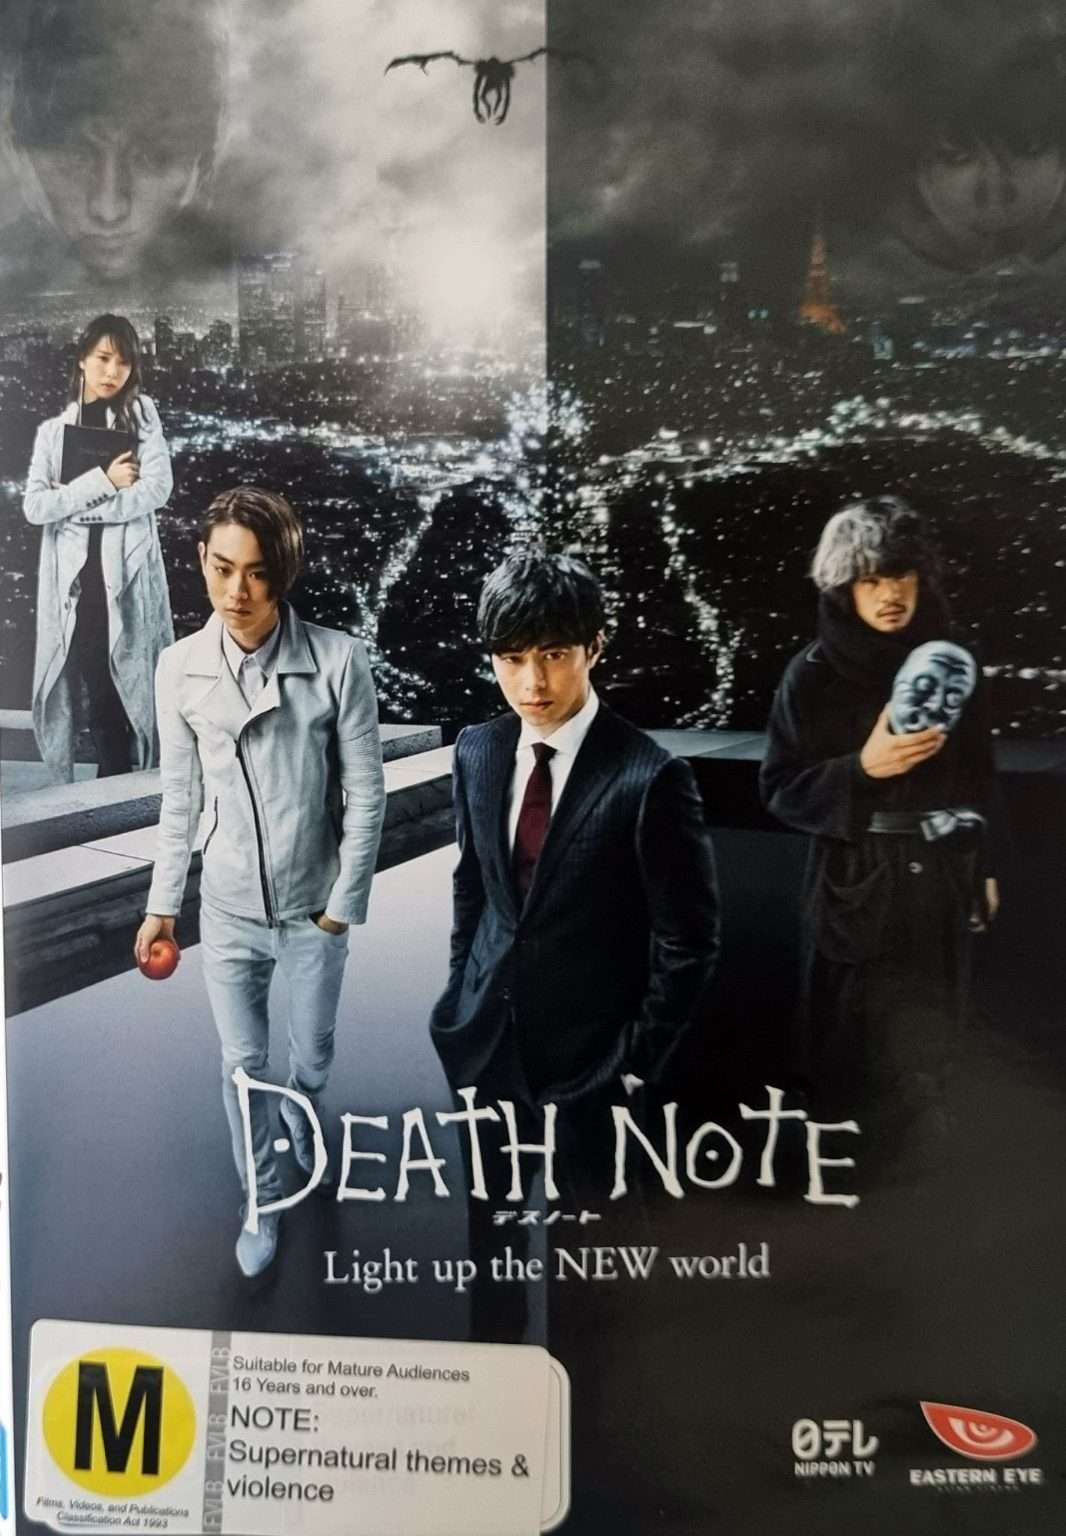 Death Note: Light Up the New World Eastern Eye